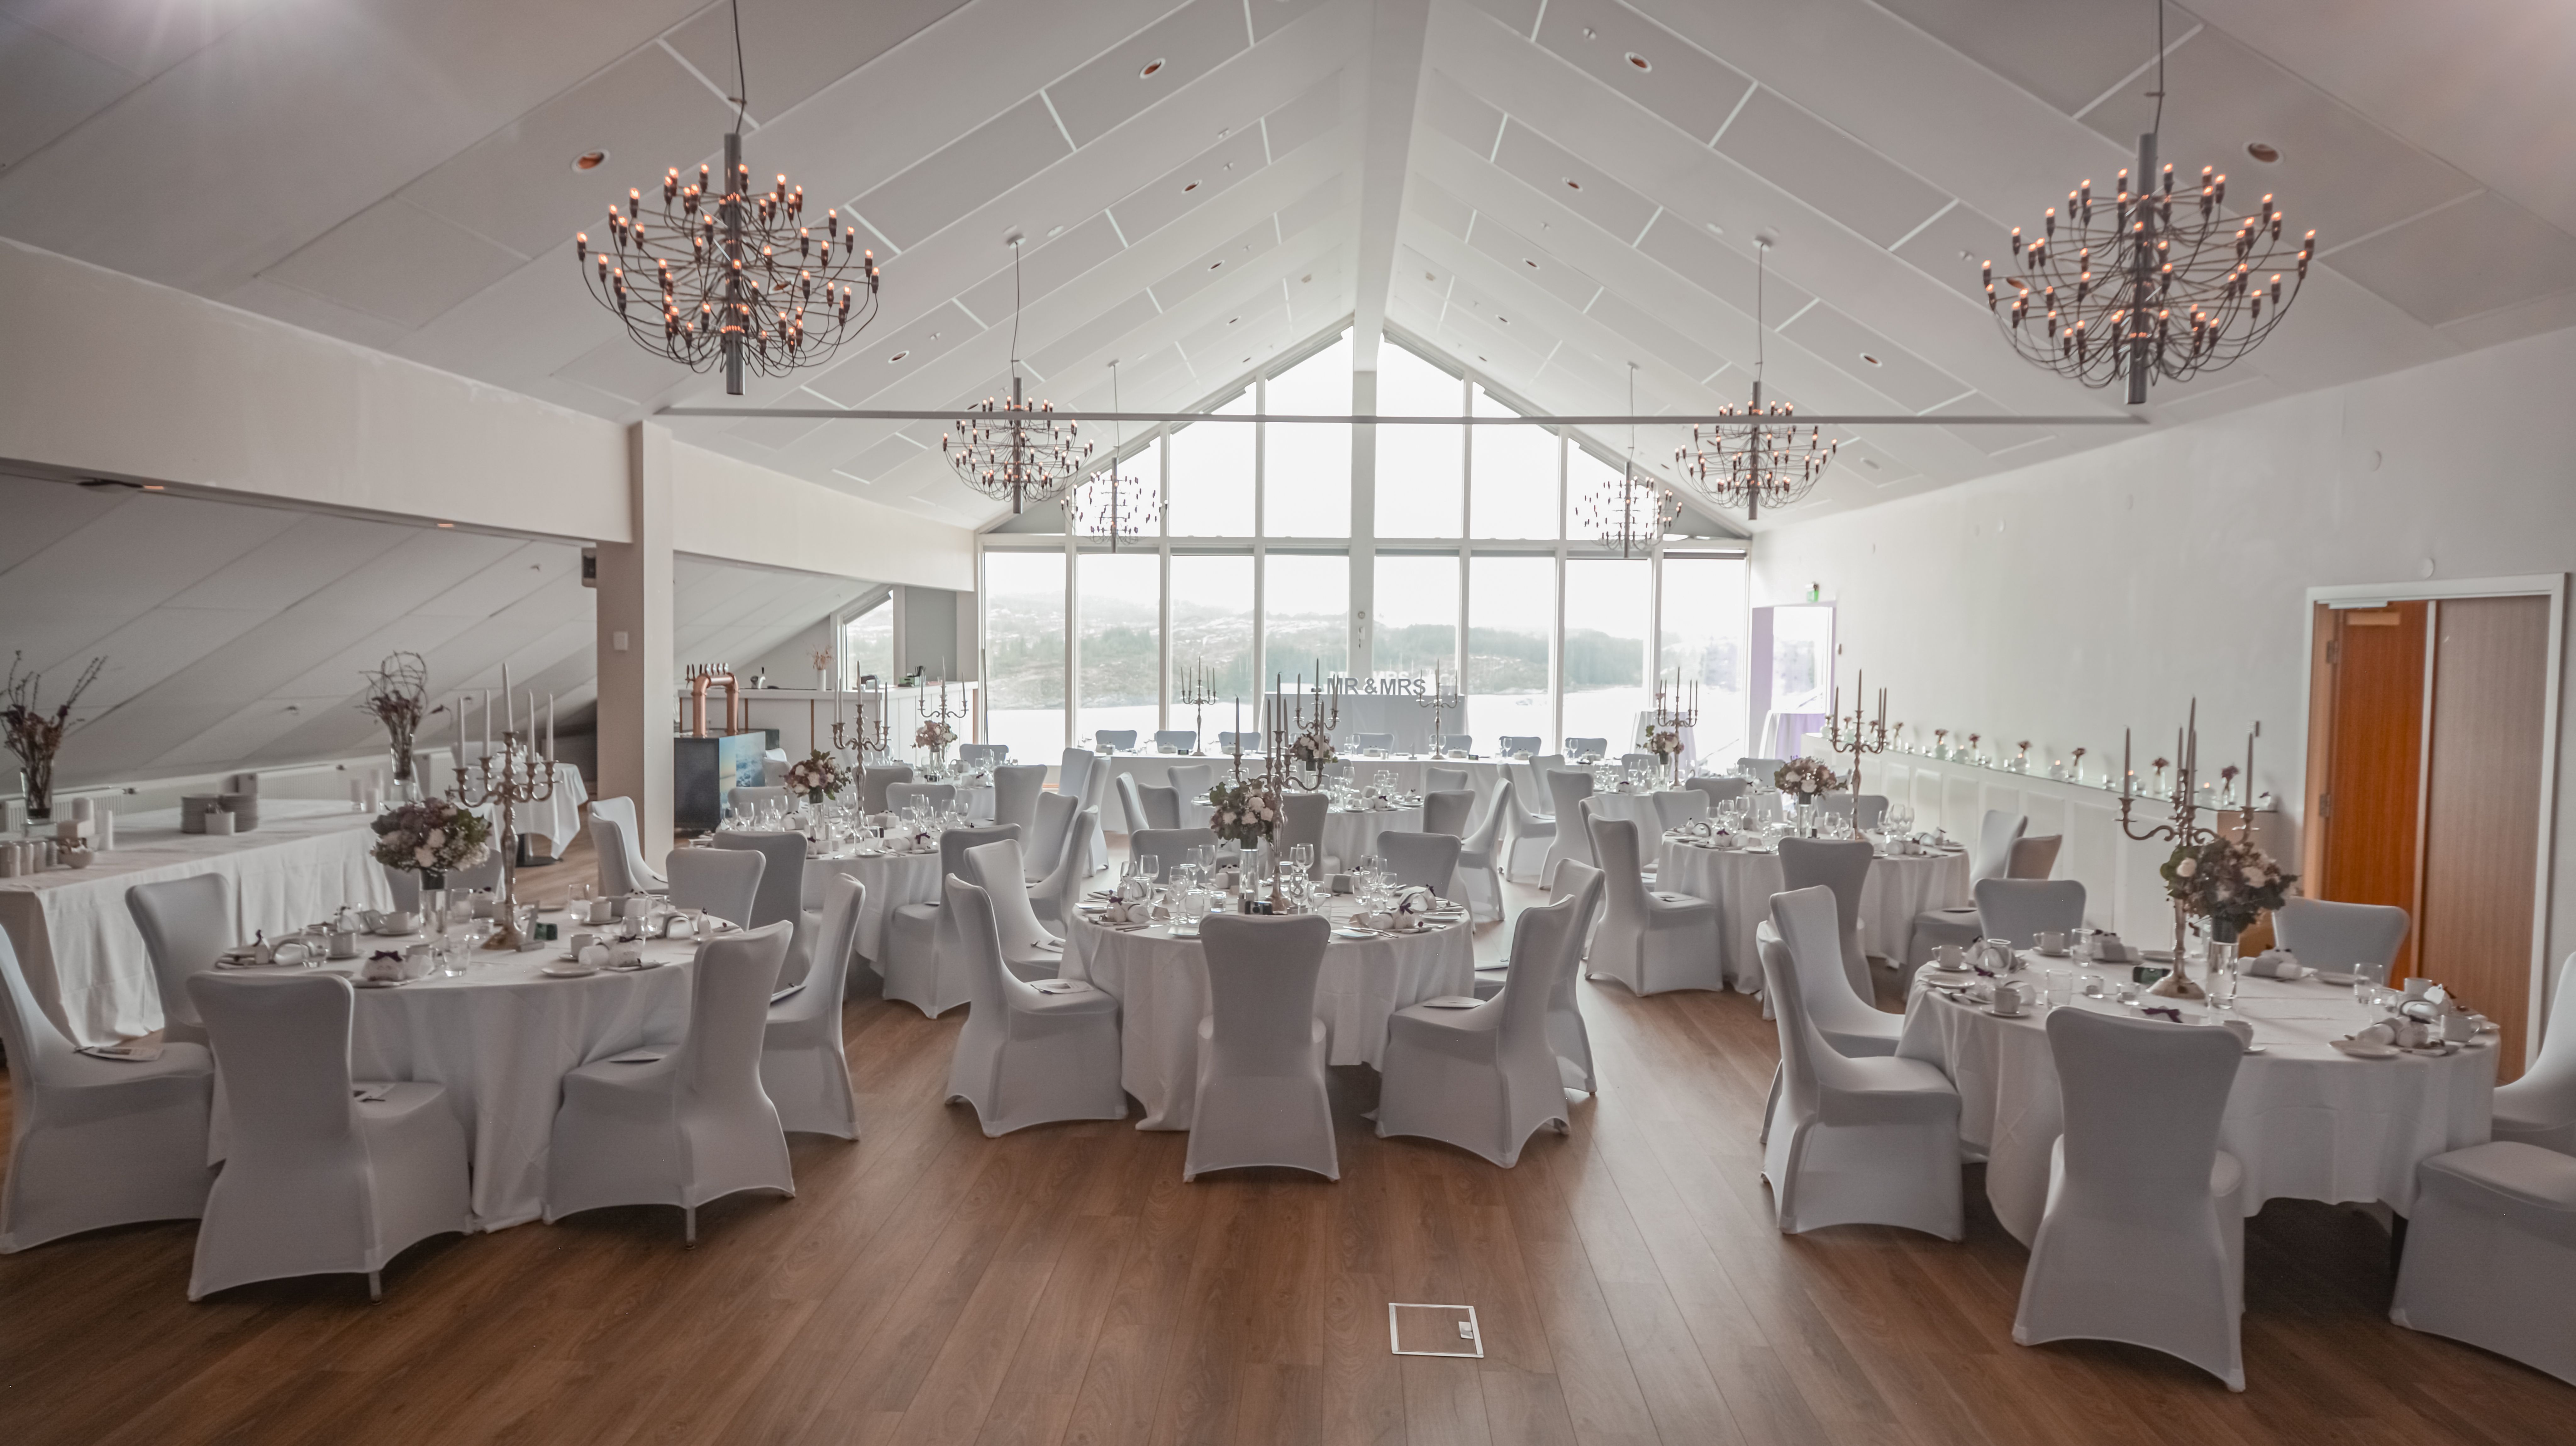 Beautiful set tables for 50 people with sea view out through the large windows. This is the "Storm hall" in Panorama hotel